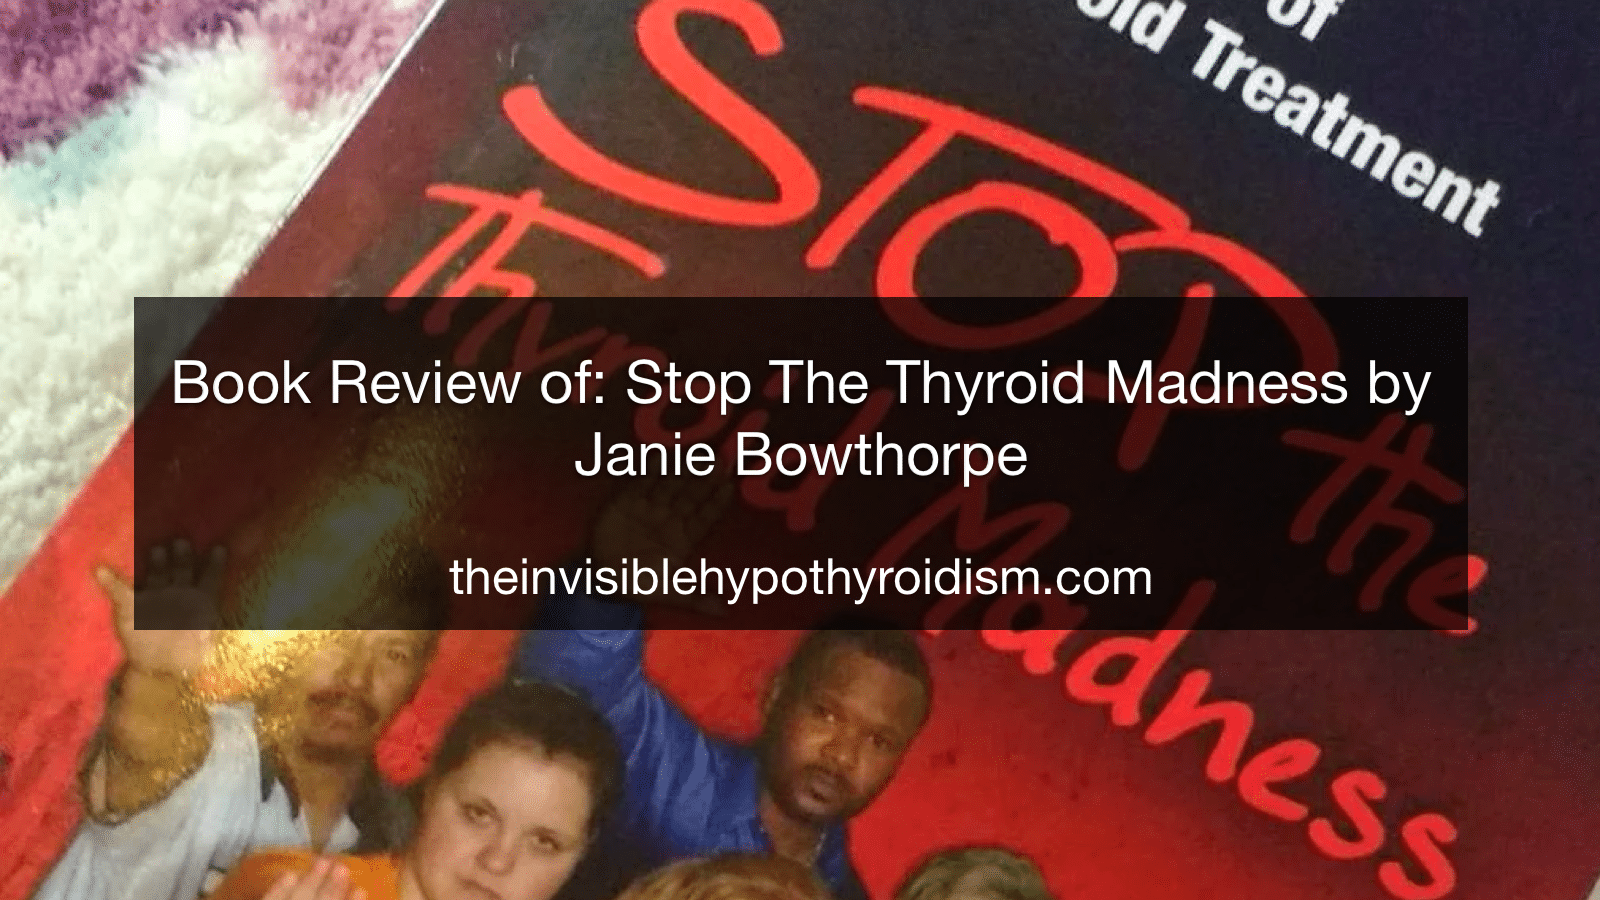 Book Review of: Stop The Thyroid Madness: A Patient Revolution.. by Janie A. Bowthorpe, M.Ed